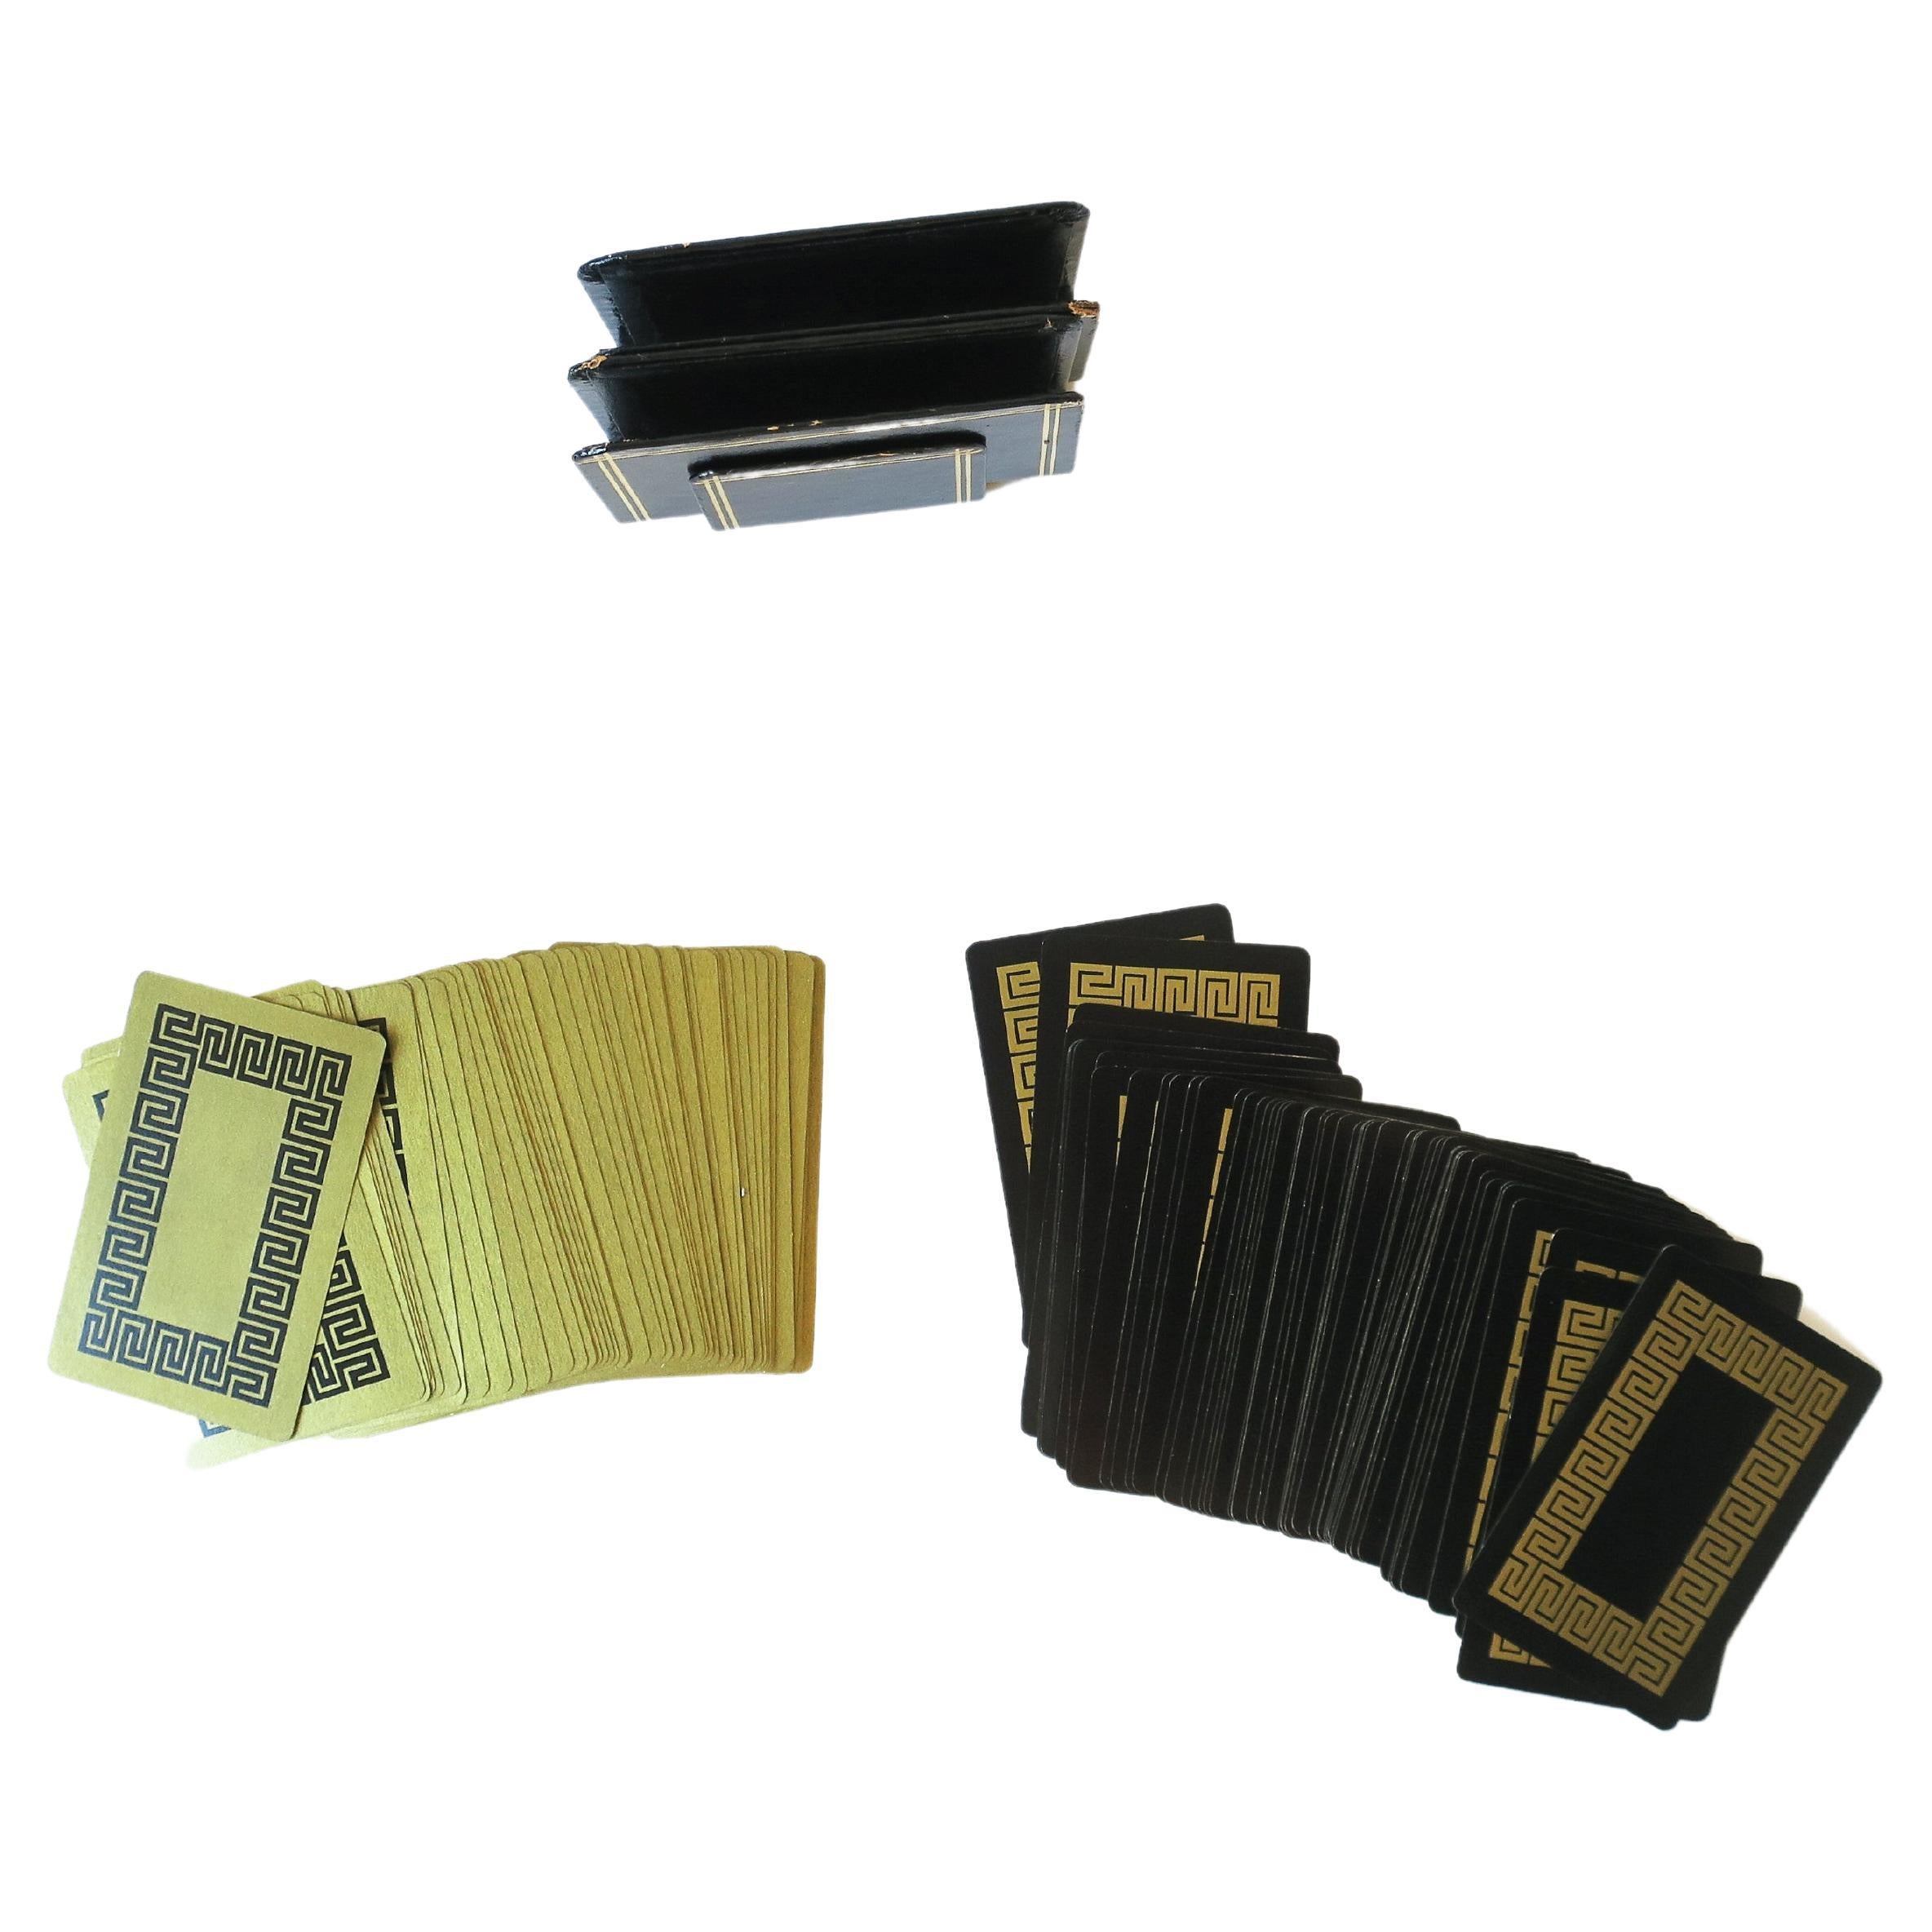 Vintage Playing Cards in Black and Gold with Greek Key Design